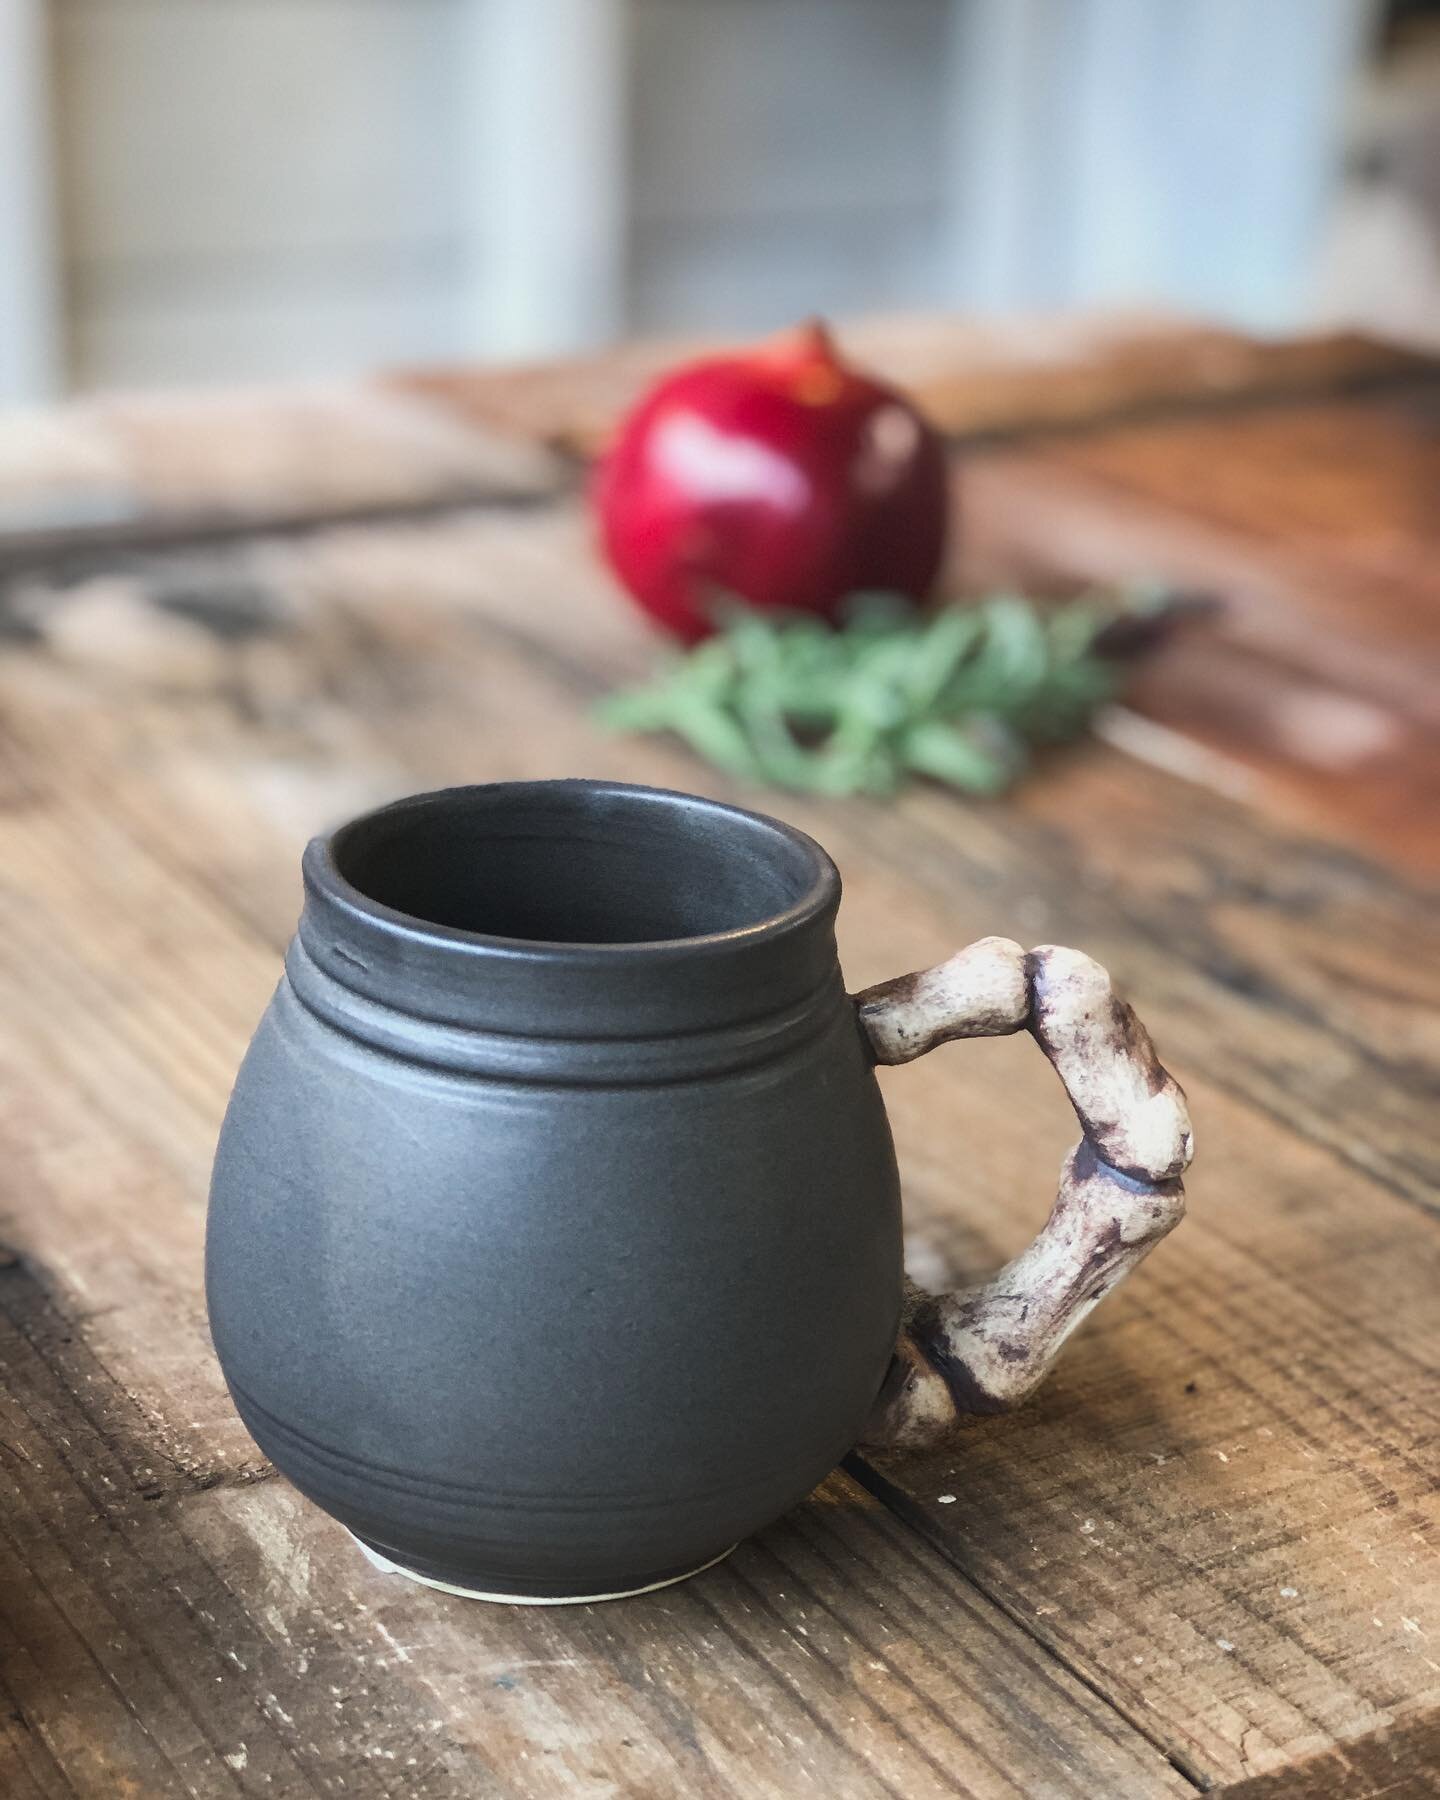 Ok, after posting the Slytherin goblet yesterday, I can&rsquo;t help but look at this cup and think, &ldquo;Are you ready for potions class?&rdquo; 😆

Definitely gotta make some bowl versions of this cauldron cup...

#lindseymdillon #ceramics #ceram